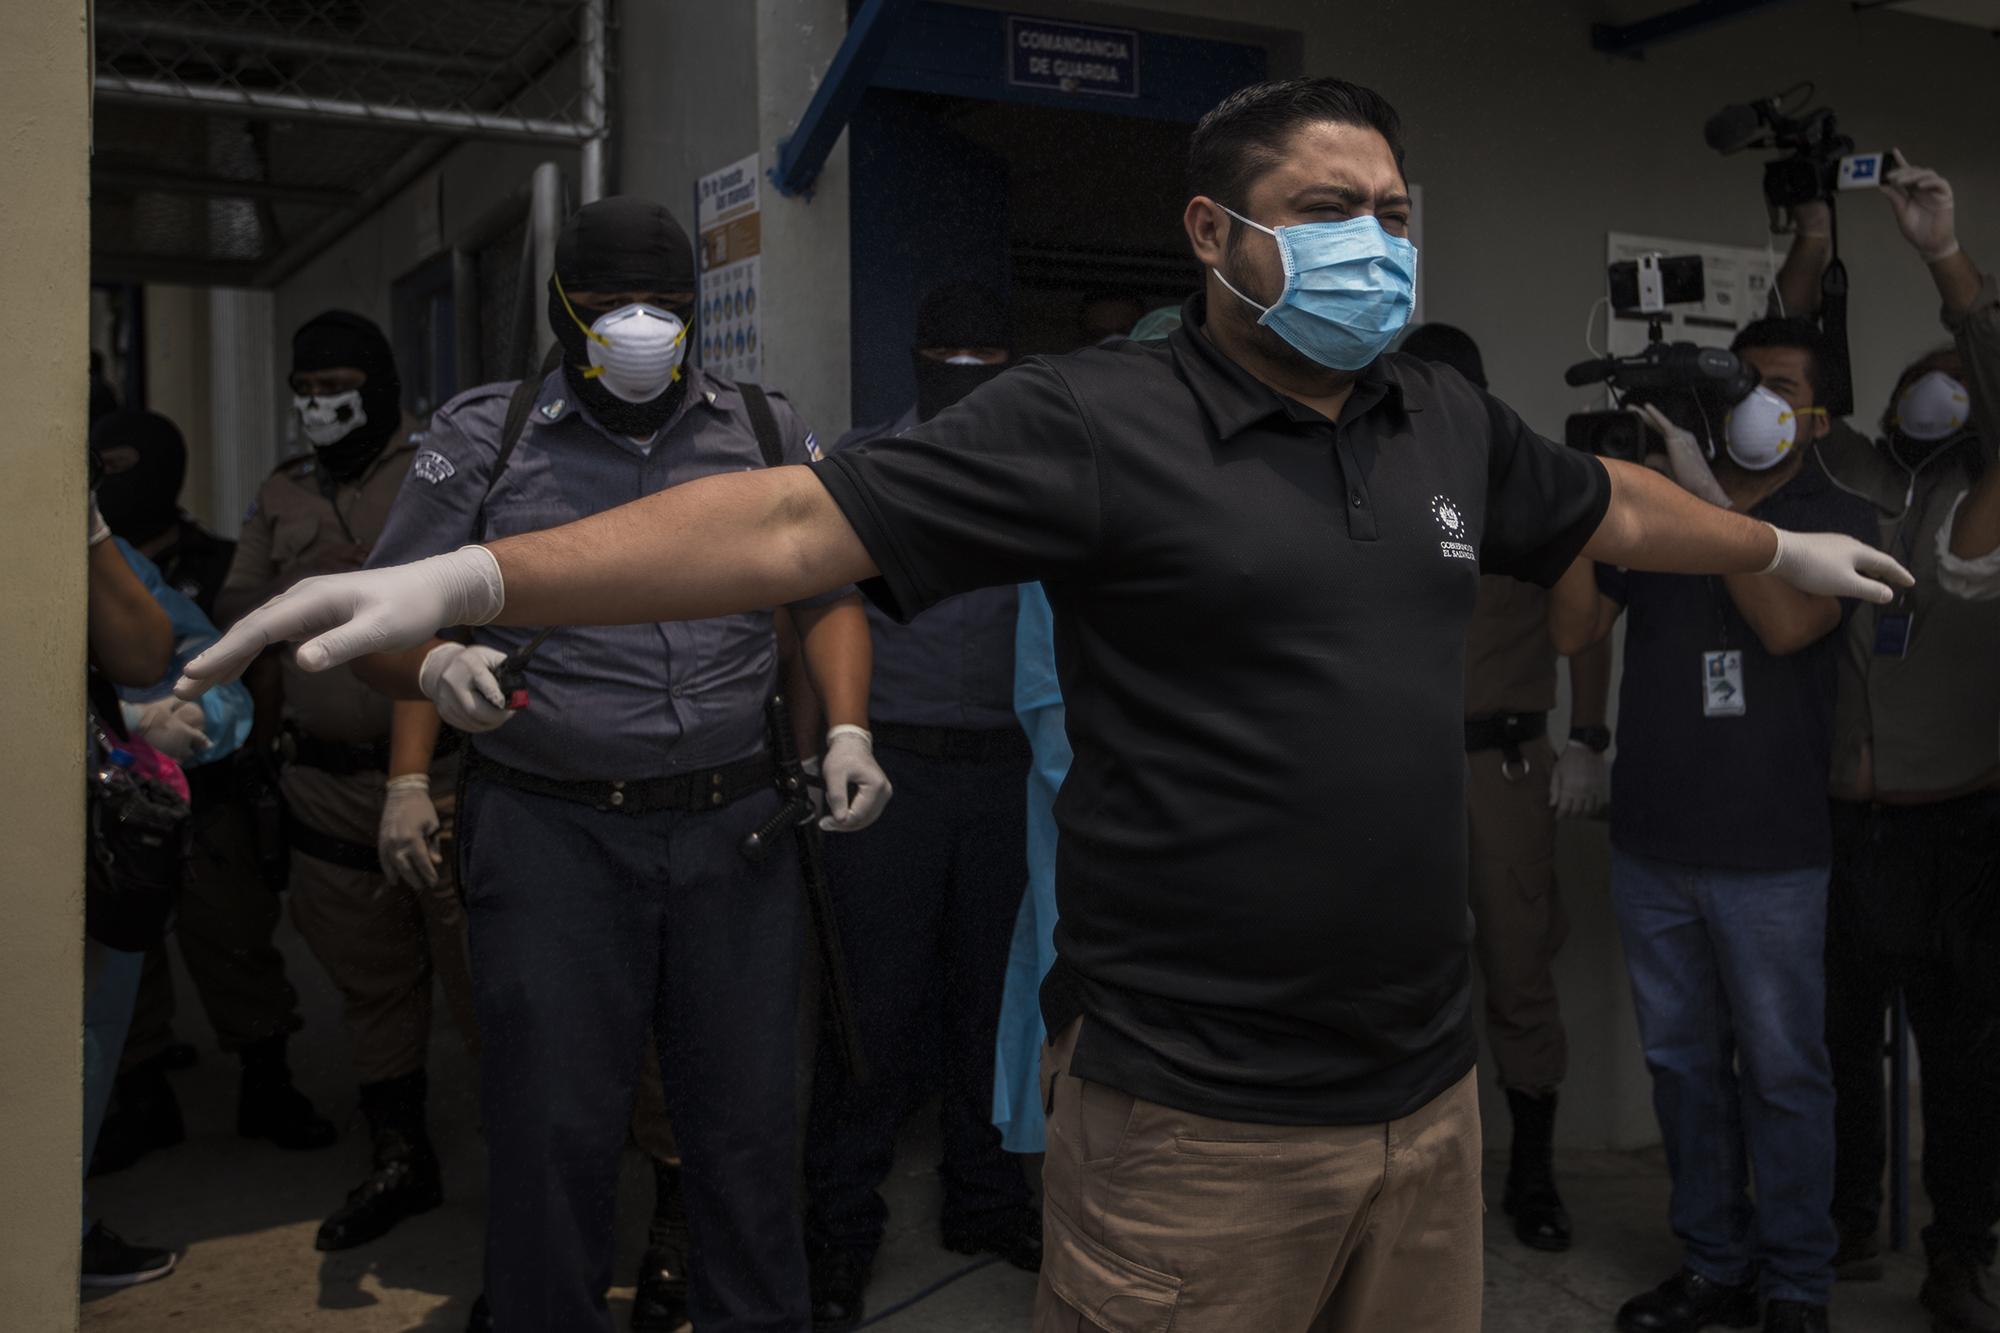 A prison guard disinfects the director of prisons, Osiris Luna, before he enters Level 3 of the Maximum Security Prison in Izalco, in the Department of Sonsonante. Luna held a press conference on April 27 to announce new measures to be taken inside the prisons after an increase in murders the previous weekend. Photo from El Faro: Víctor Peña.